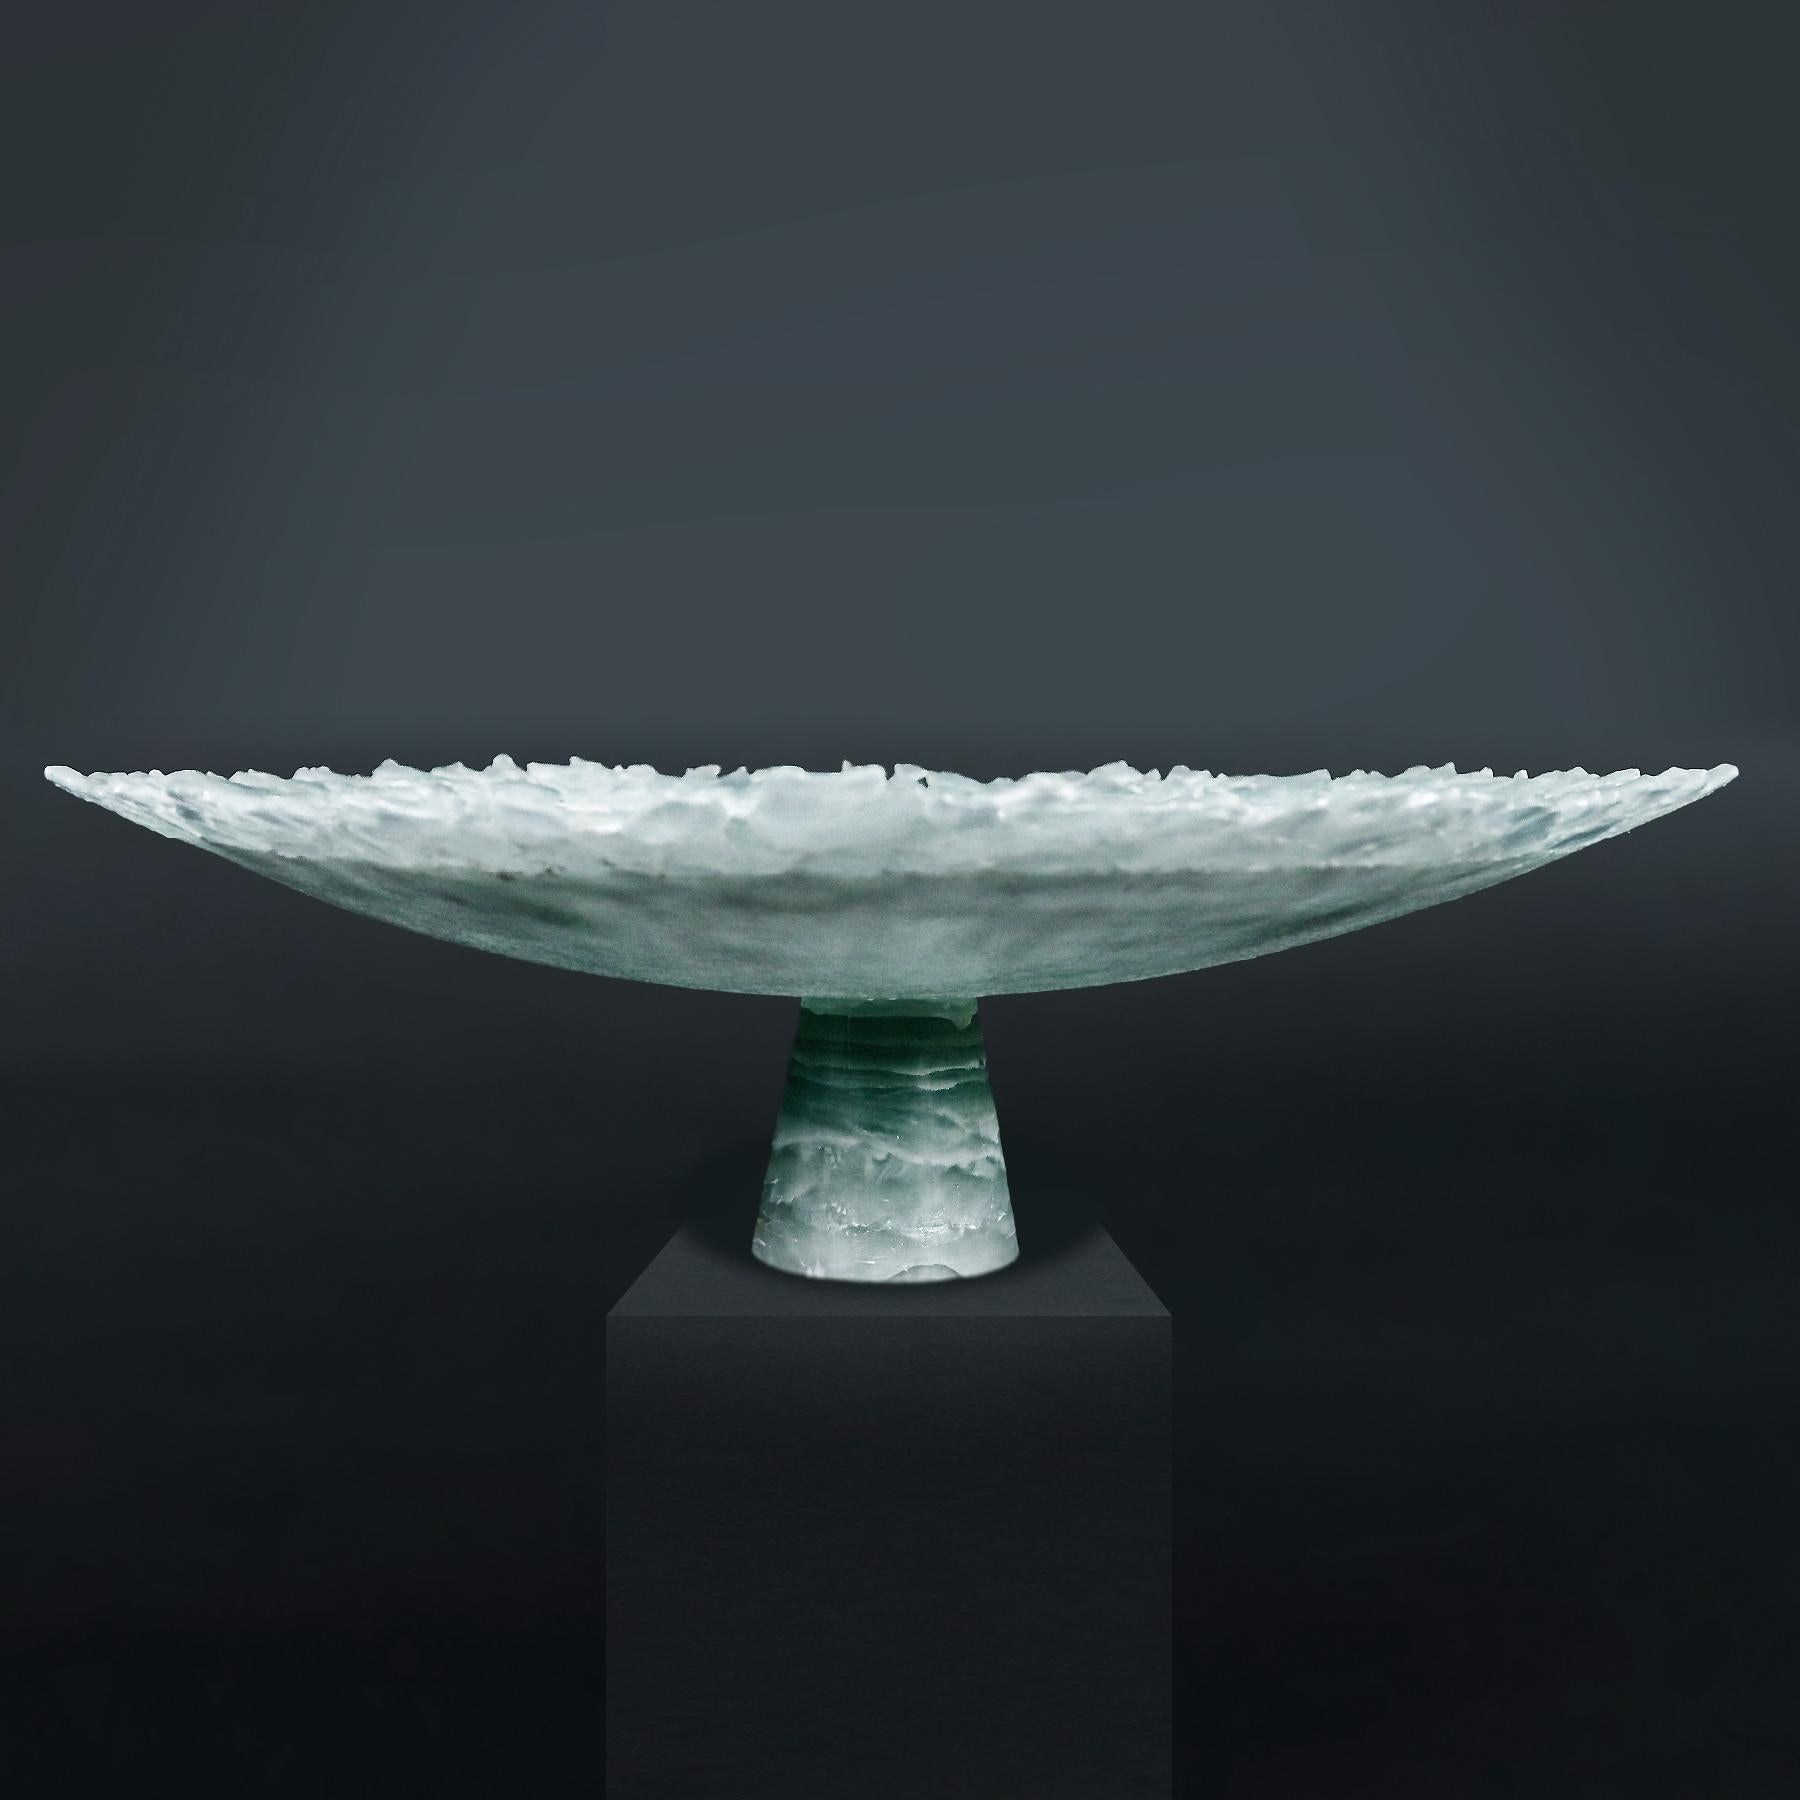 Large vintage 1960s French Pate de Verre light aquamarine coloured glass centre display dish.

The Pate-de-verre glass technique dates back to the second millennium BC and was mostly used in jewellery and sculpture inlays in ancient Egypt and Rome.